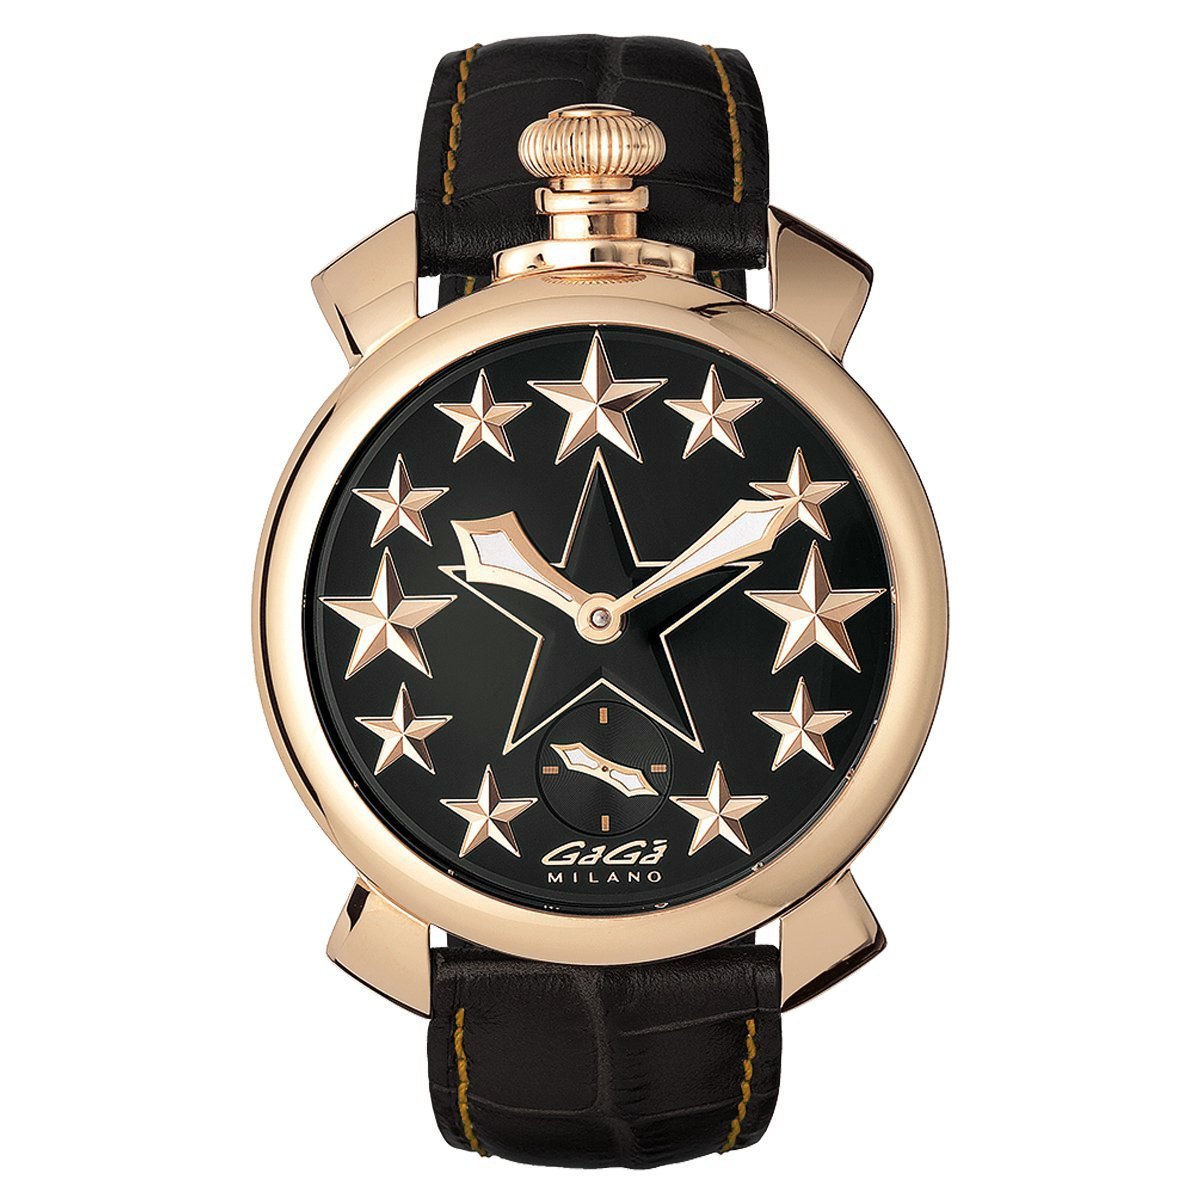 Gaga Milano Manuale 48MM Collection – Watches & Crystals